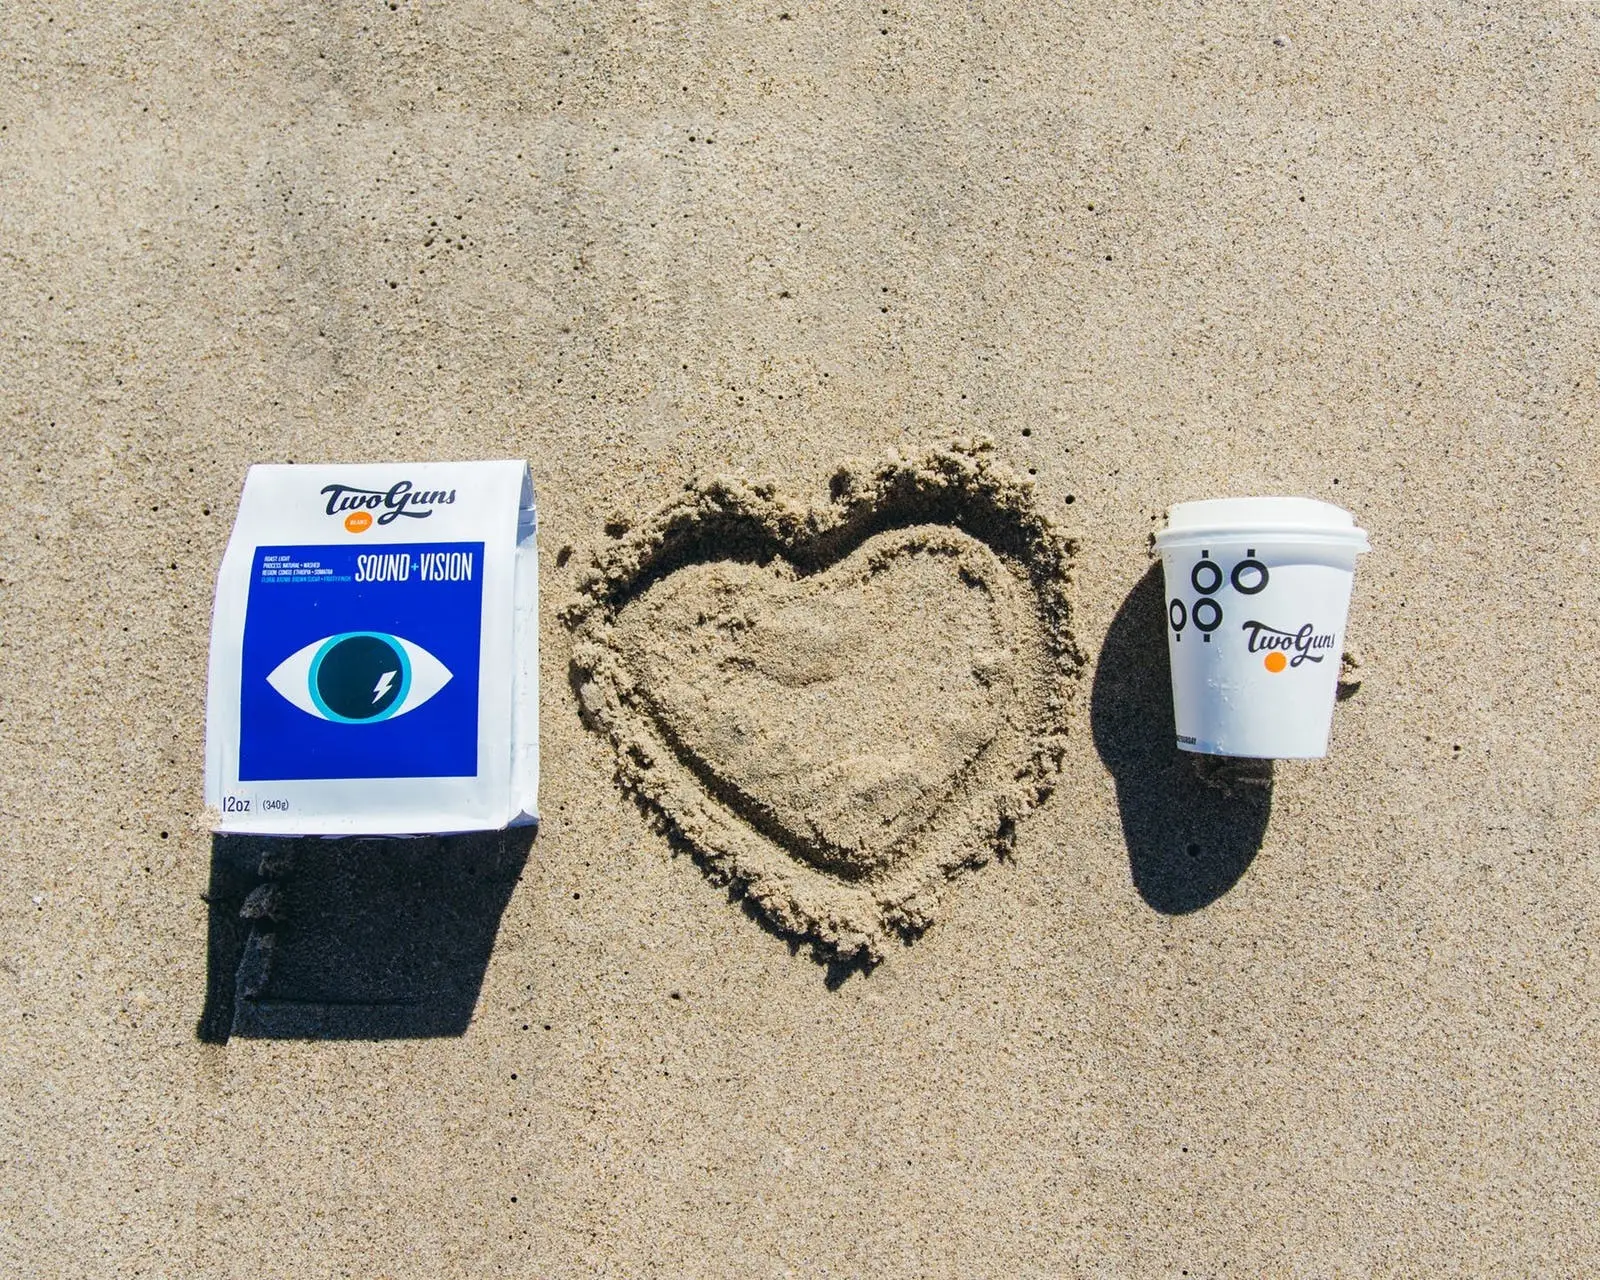 a coffee cup and bag of coffee on a sandy beach